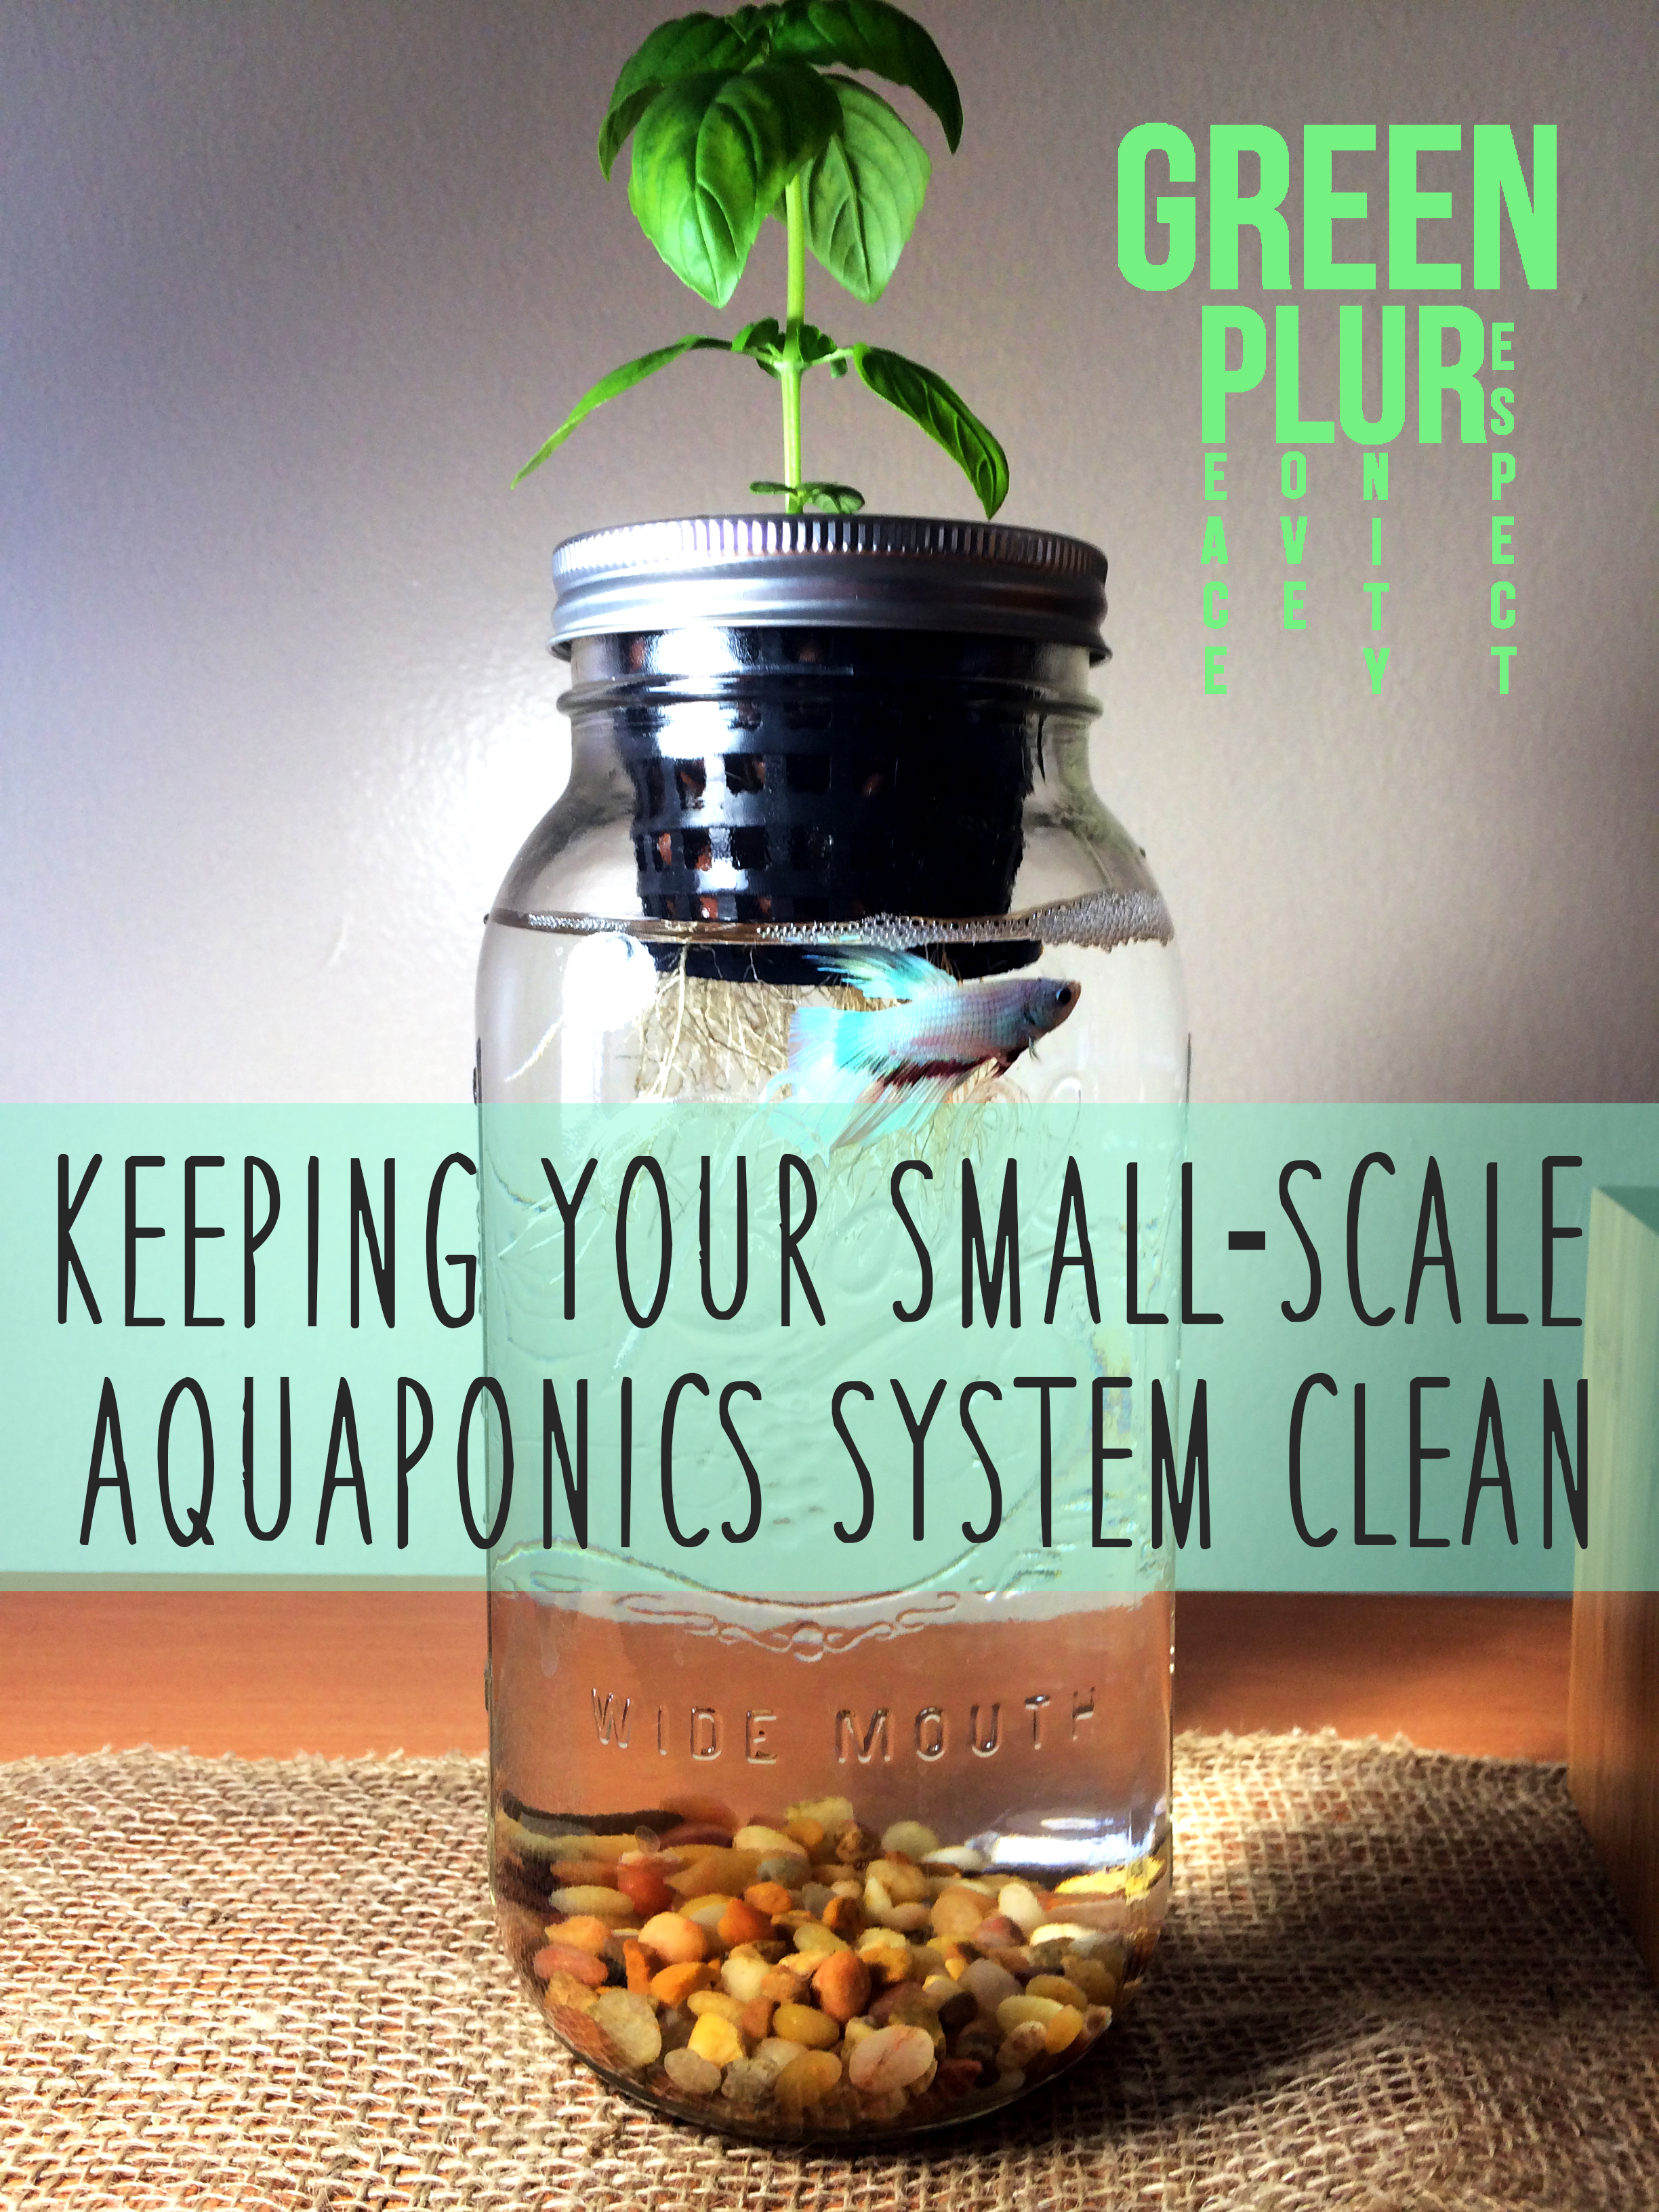 Keeping a Small-Scale Aquaponics System Clean – Green PLUR